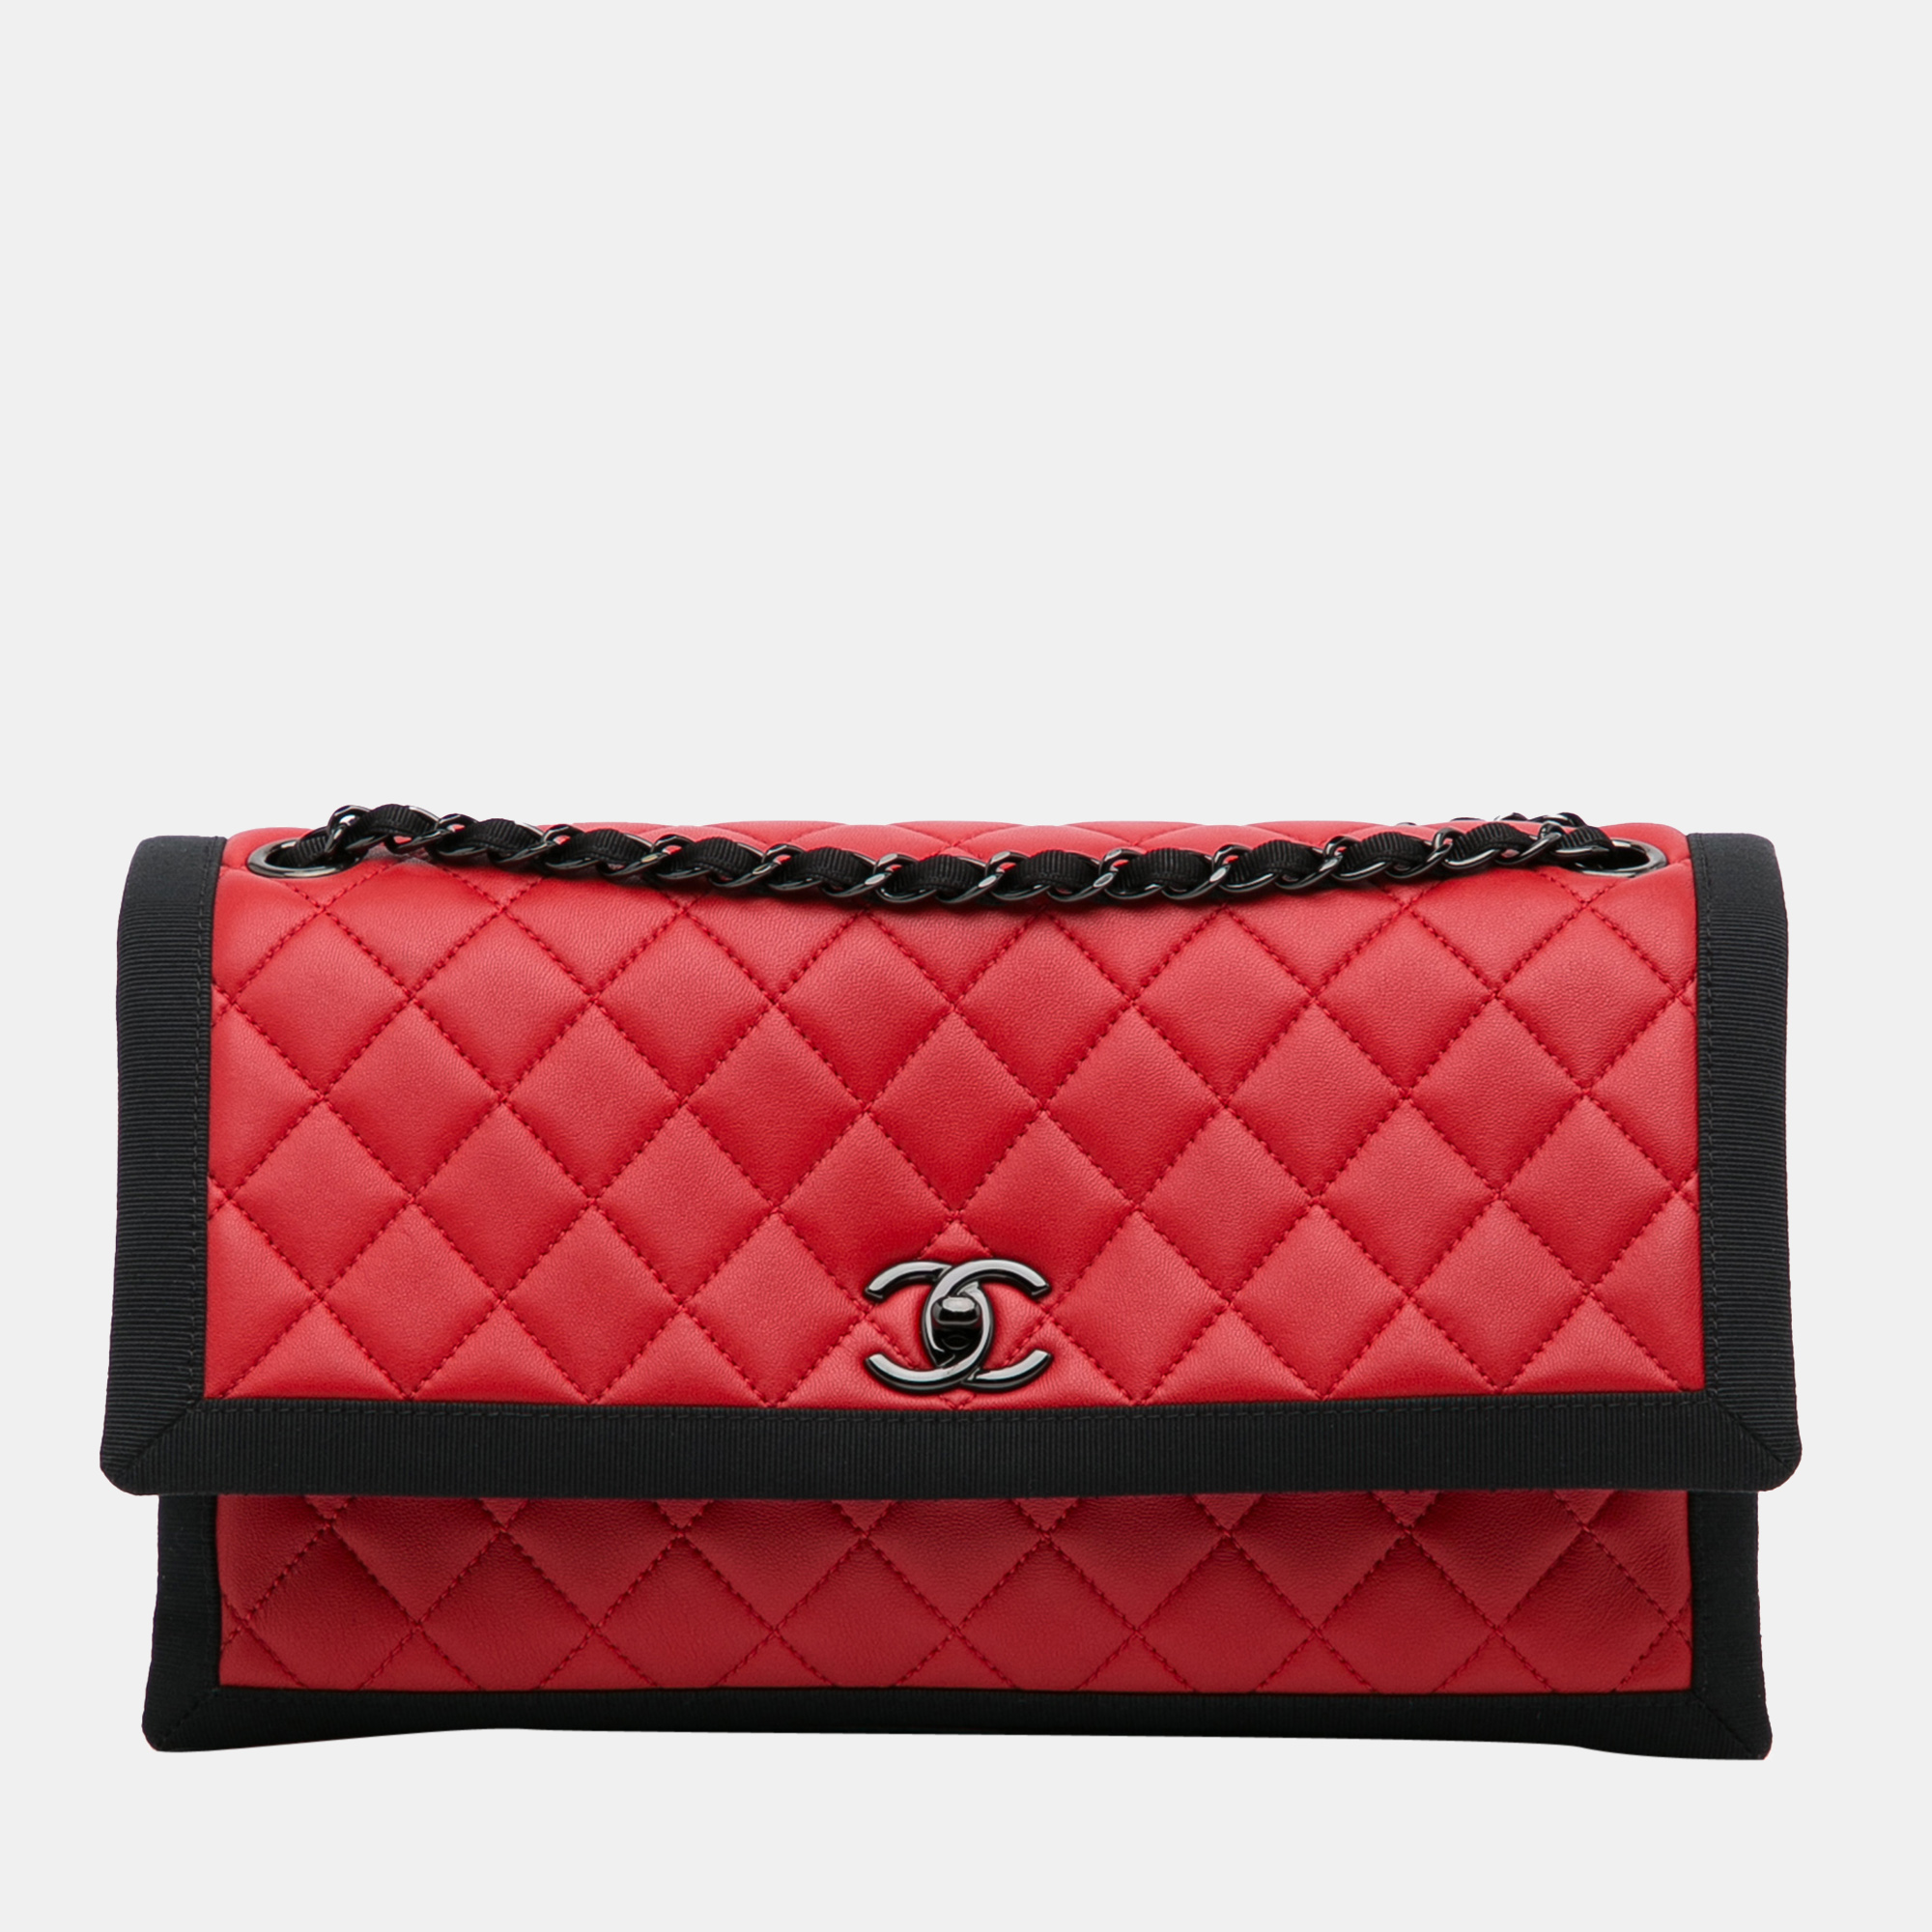 Chanel Black Red Medium Quilted Lambskin Grosgrain Two Tone Flap Bag